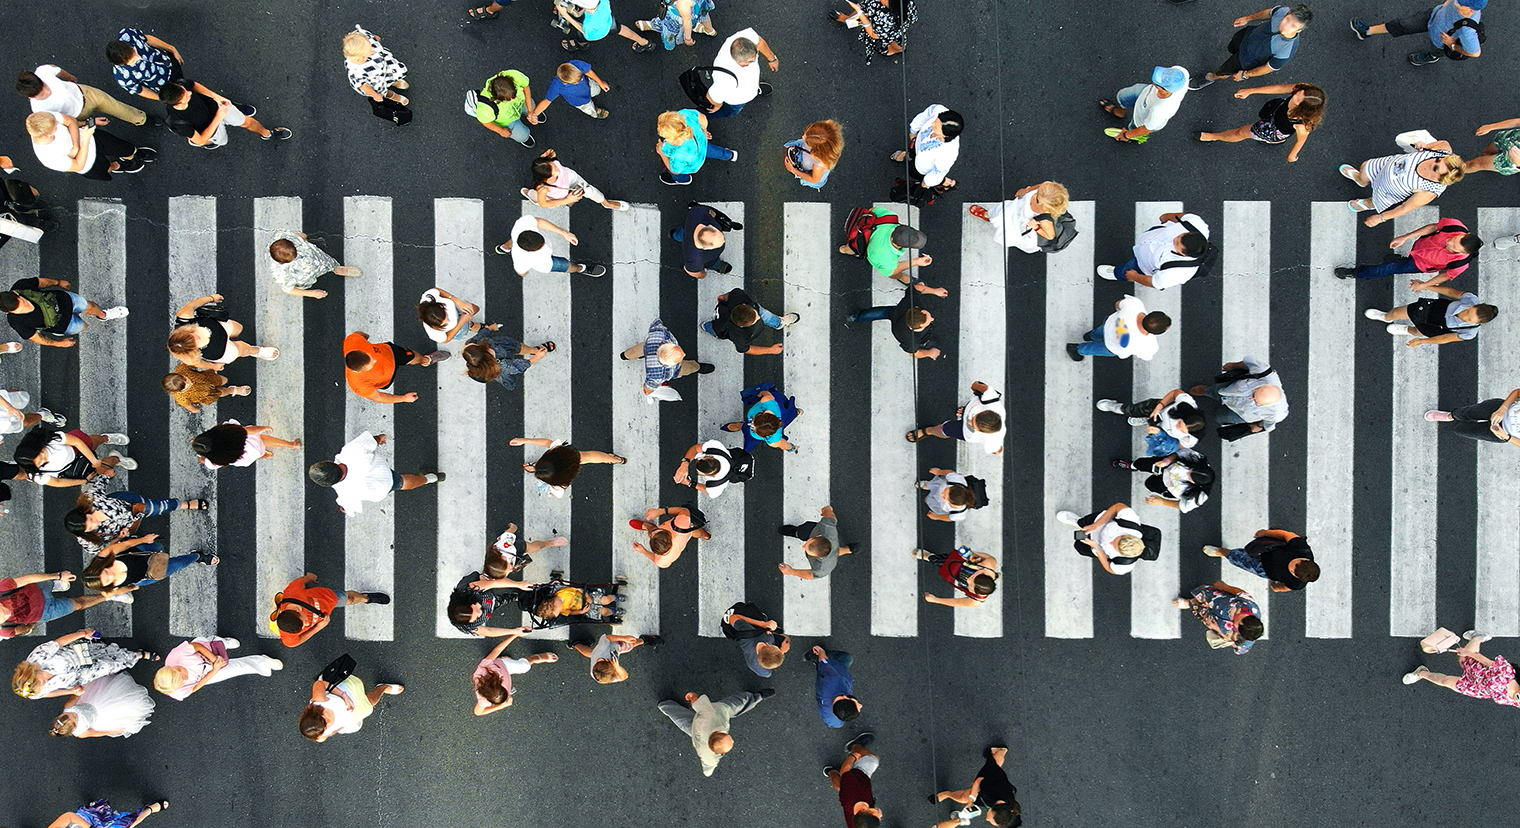 Overhead view of a crosswalk with many pedestrians passing both ways.